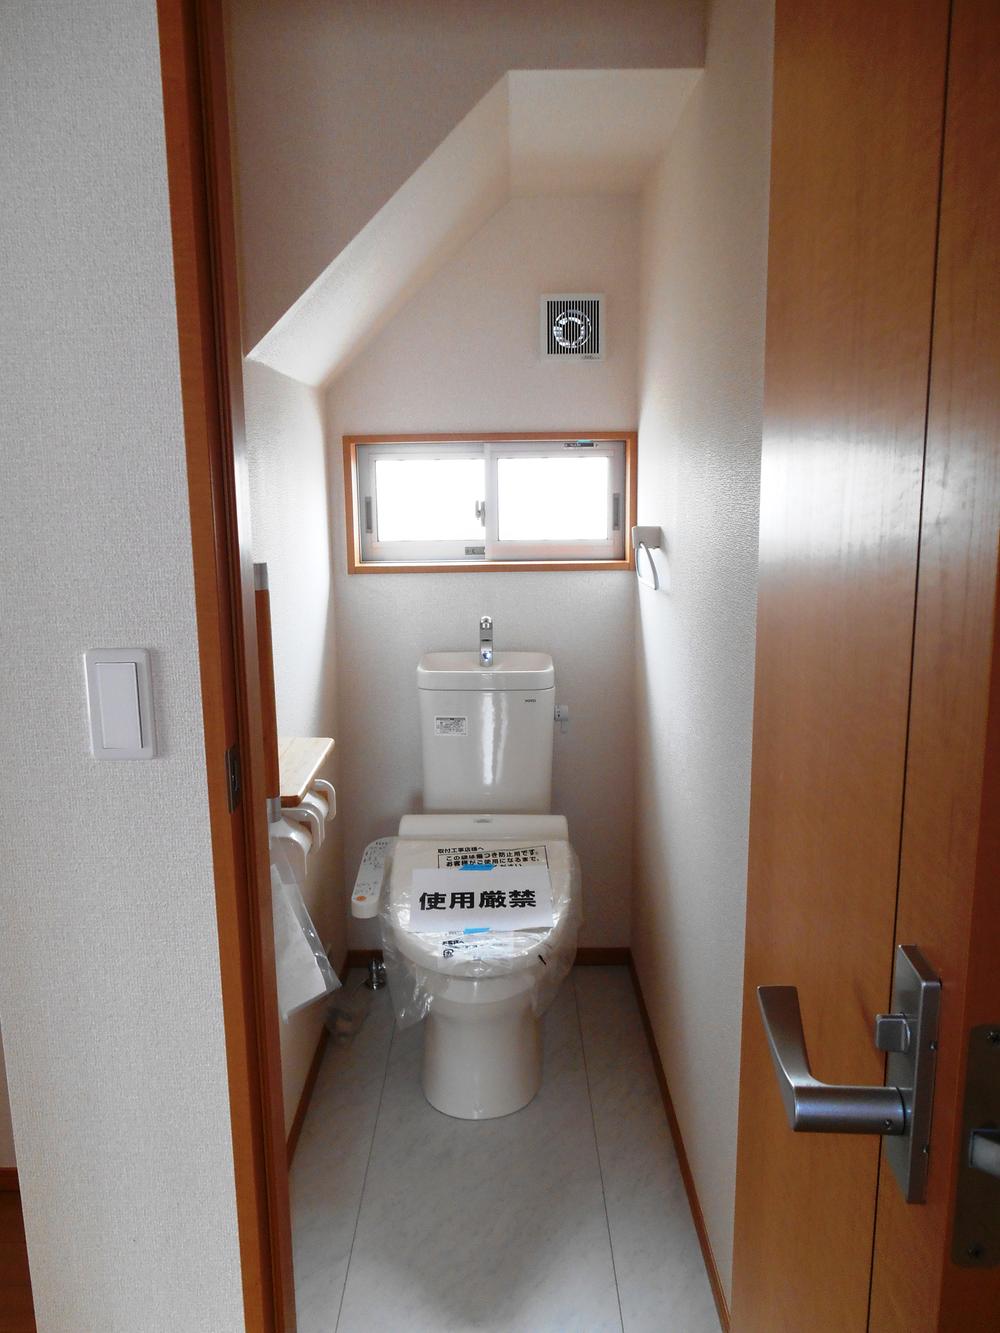 Toilet. Same specifications first floor toilet